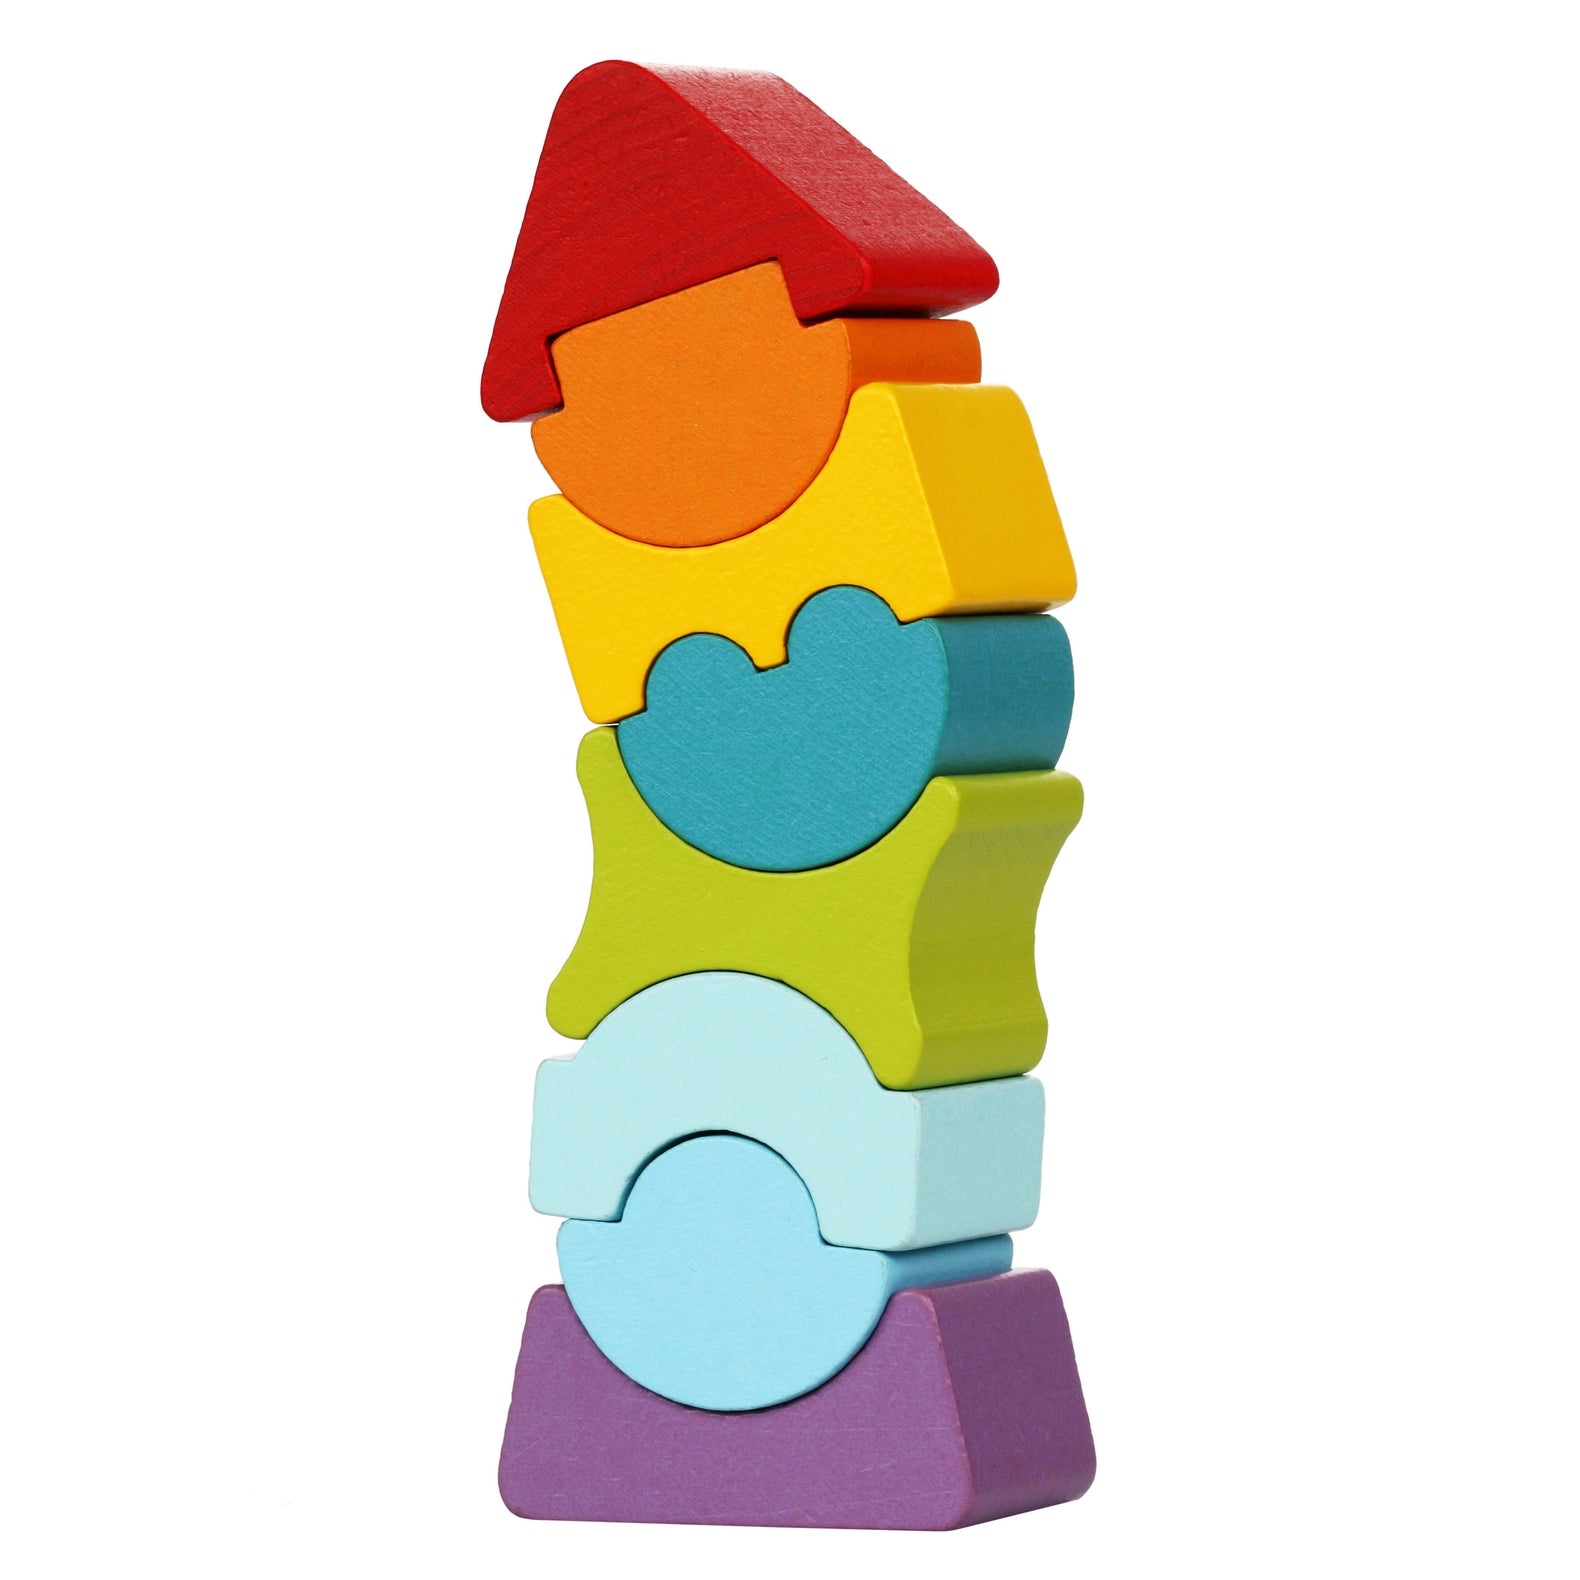 Flexible Tower Stacking Toy